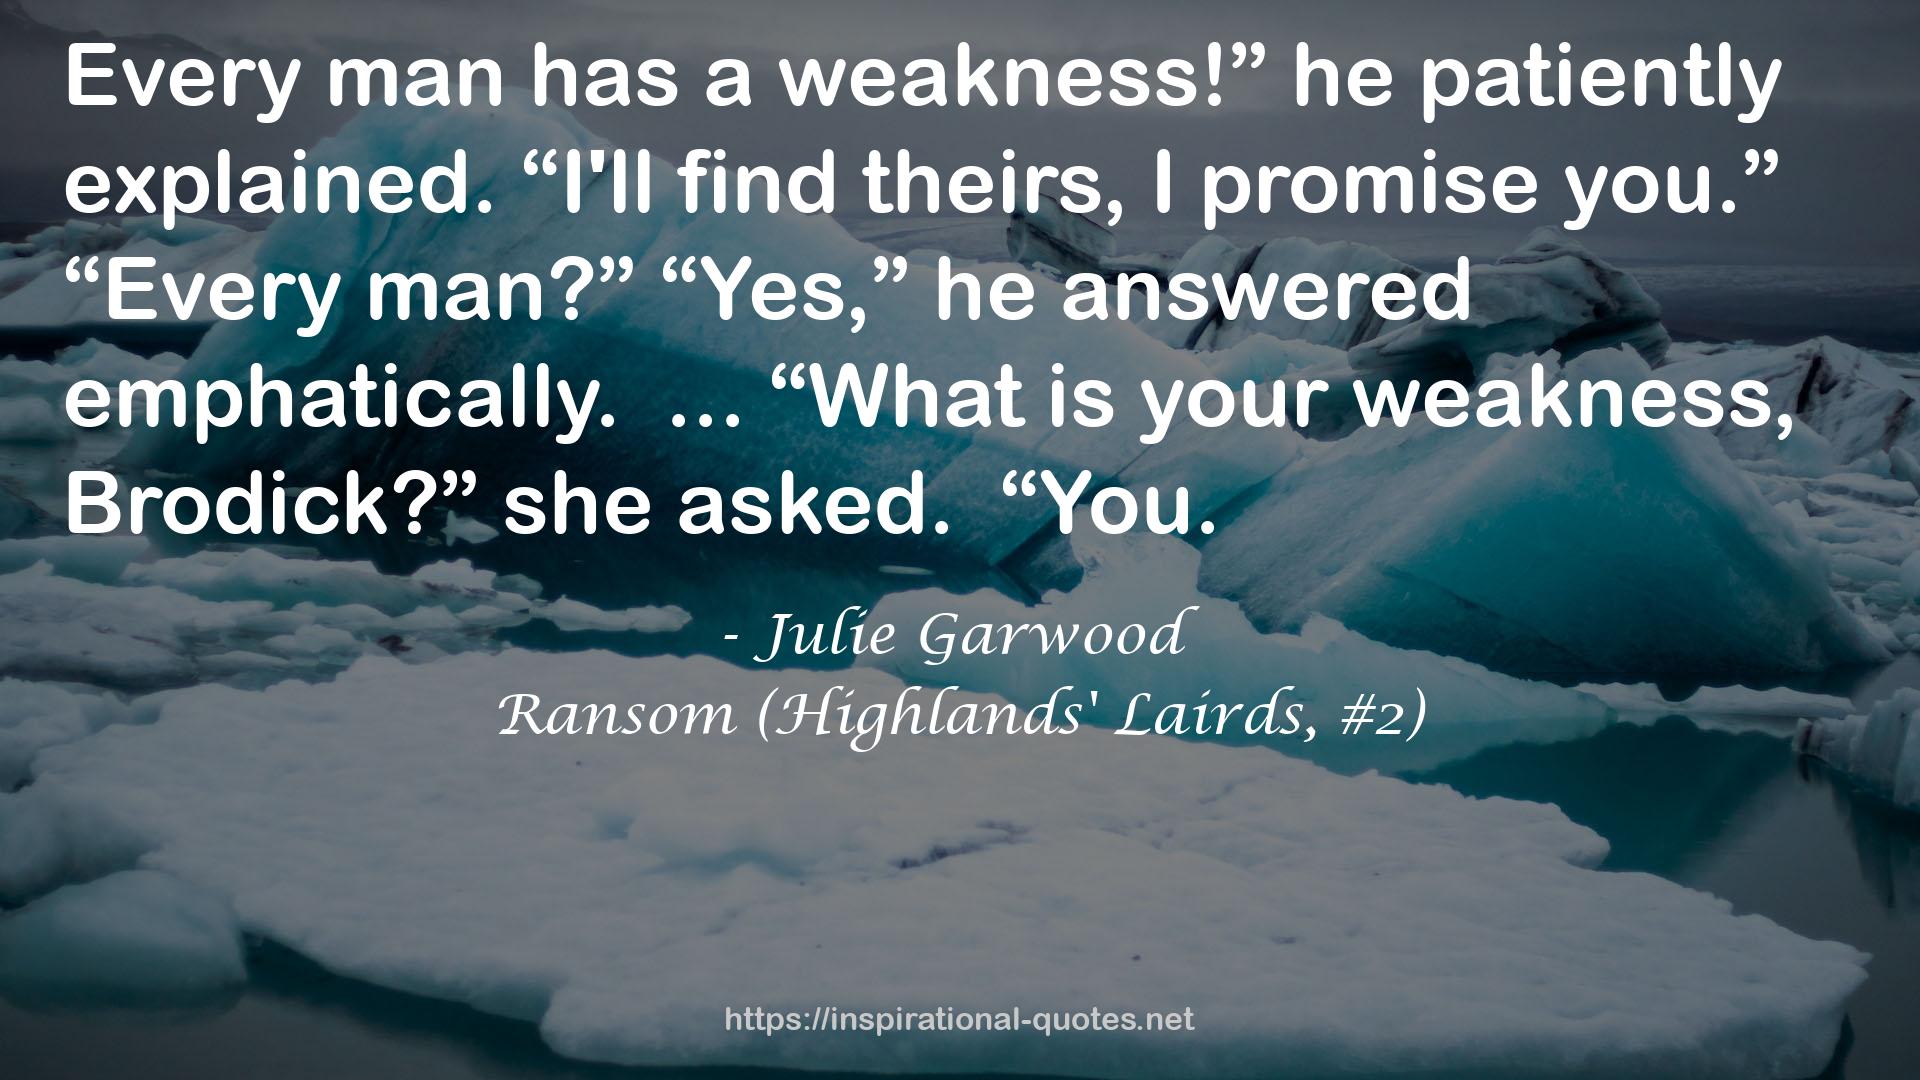 Ransom (Highlands' Lairds, #2) QUOTES